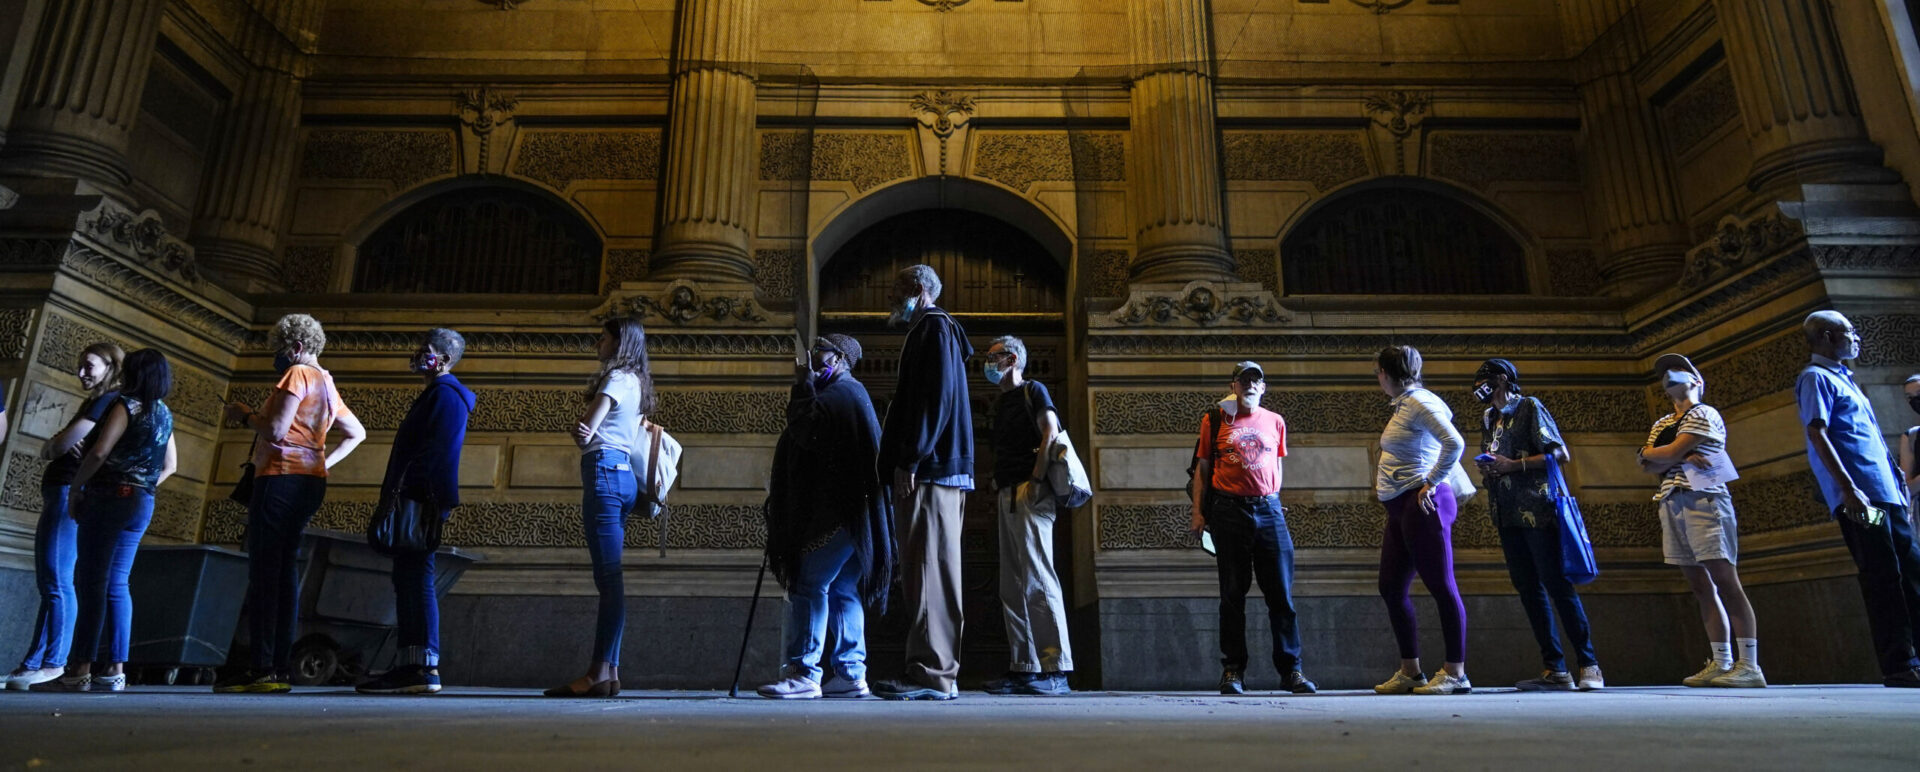 Voters wait in line to make corrections to their ballots for the midterm elections at City Hall in Philadelphia, Monday, Nov. 7, 2022. According to data from AP VoteCast, voters with no religious affiliation supported Democratic candidates and abortion rights by staggering percentages in the 2022 midterm elections. (AP Photo/Matt Rourke)